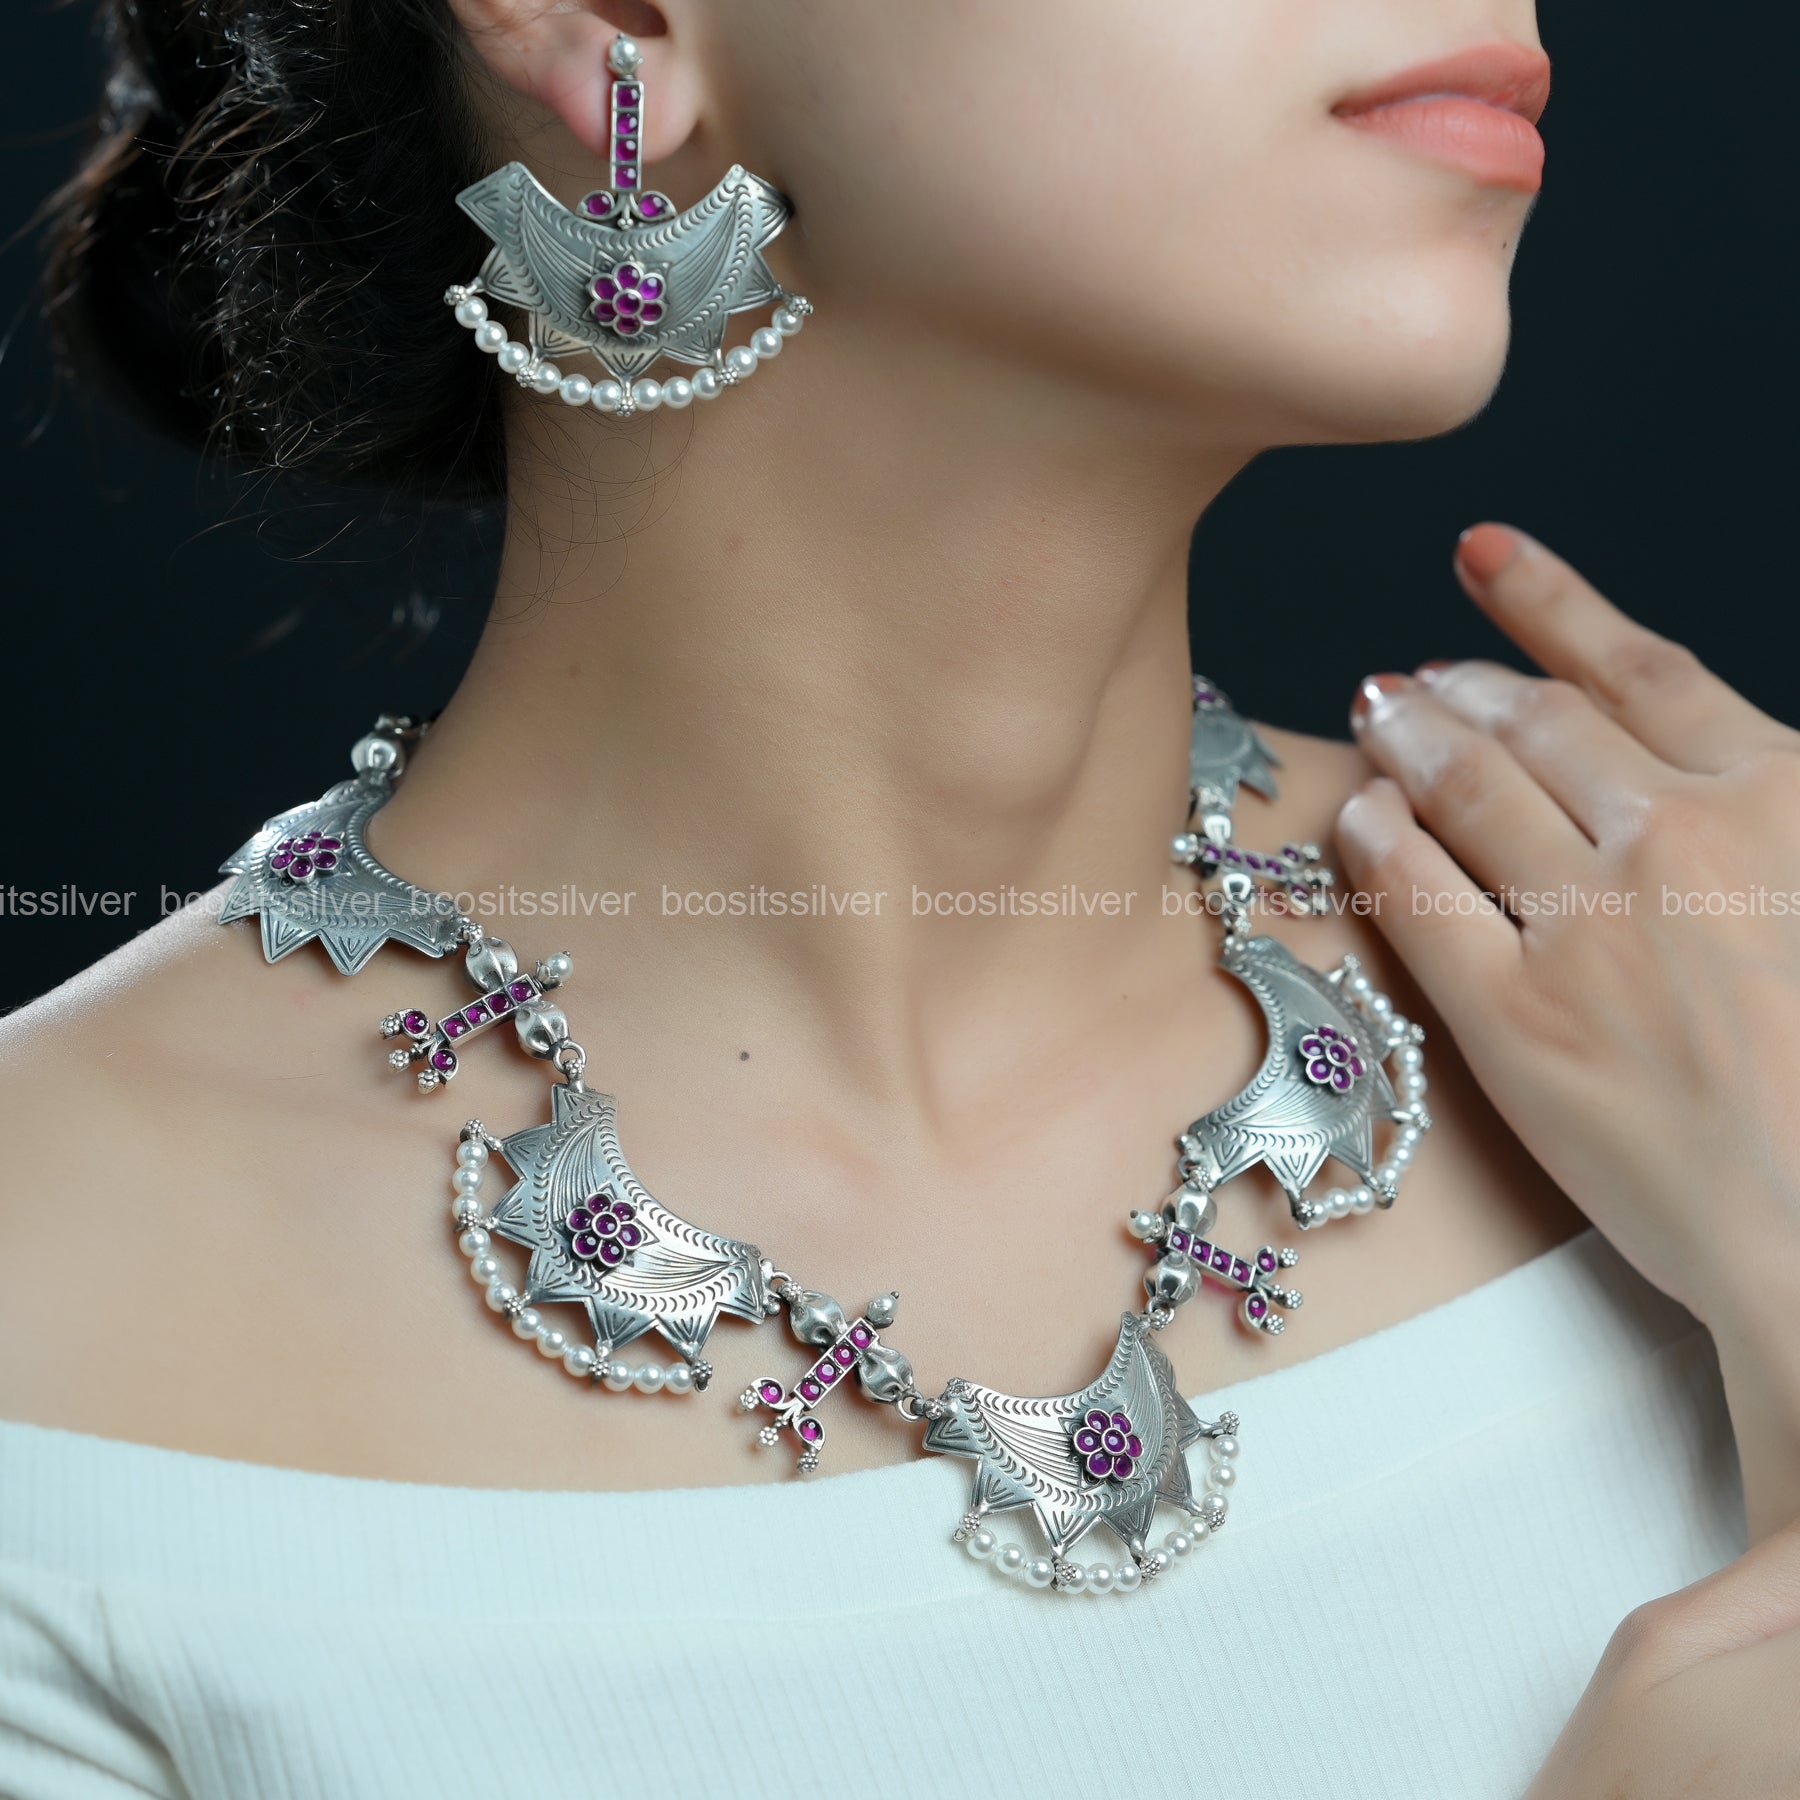 Oxidized Chaand Necklace with Earrings - 1506